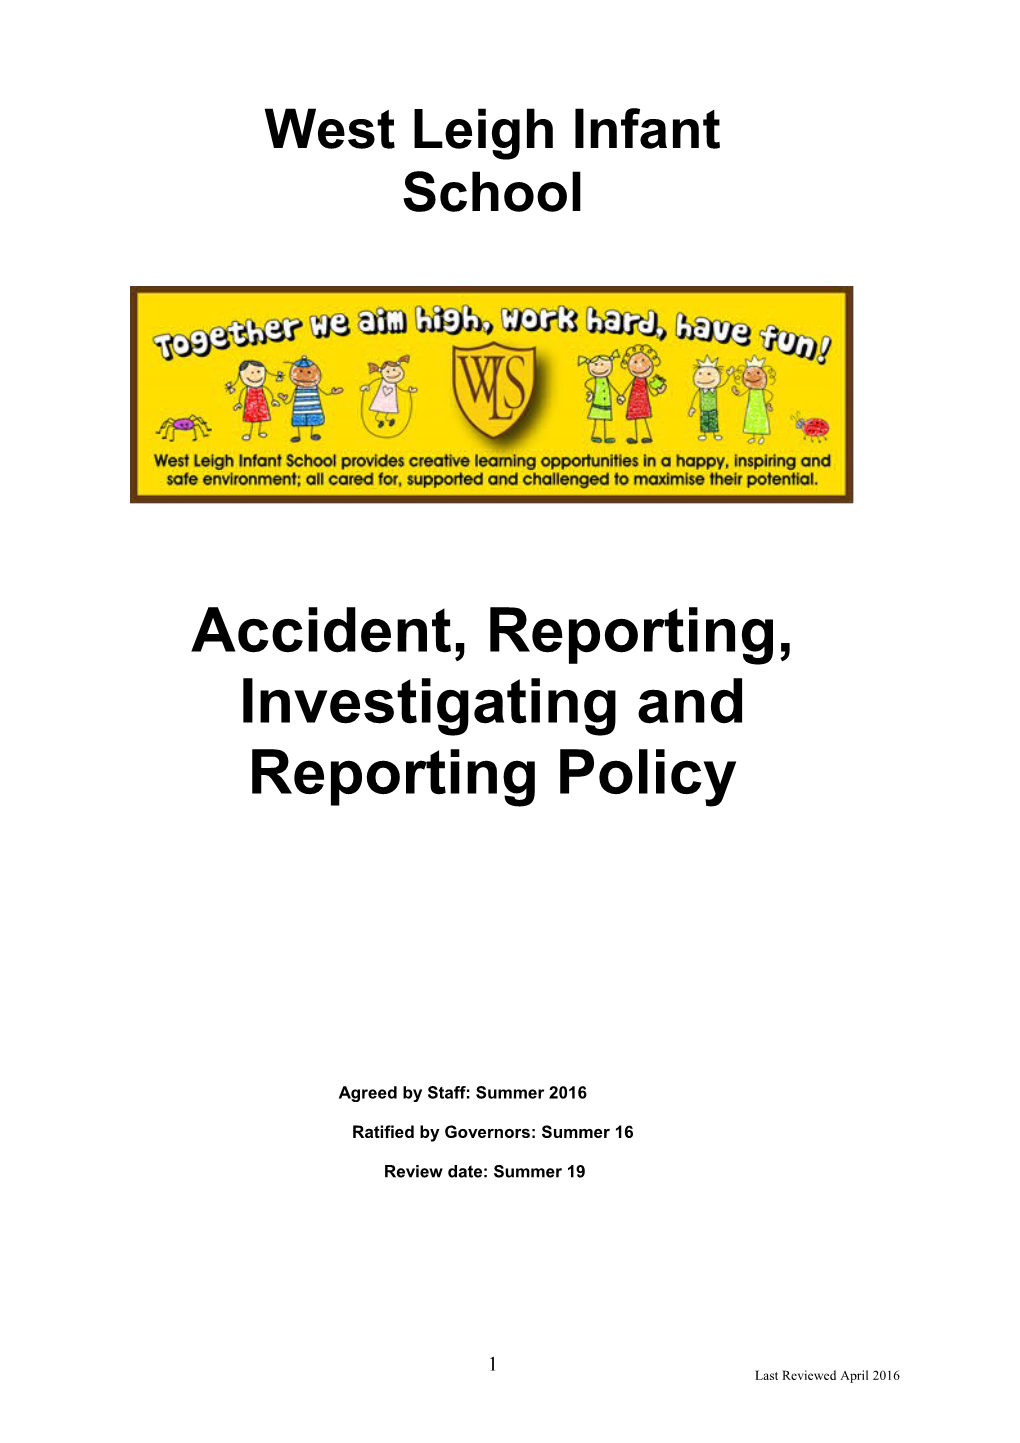 Accident, Reporting, Investigating and Reporting Policy